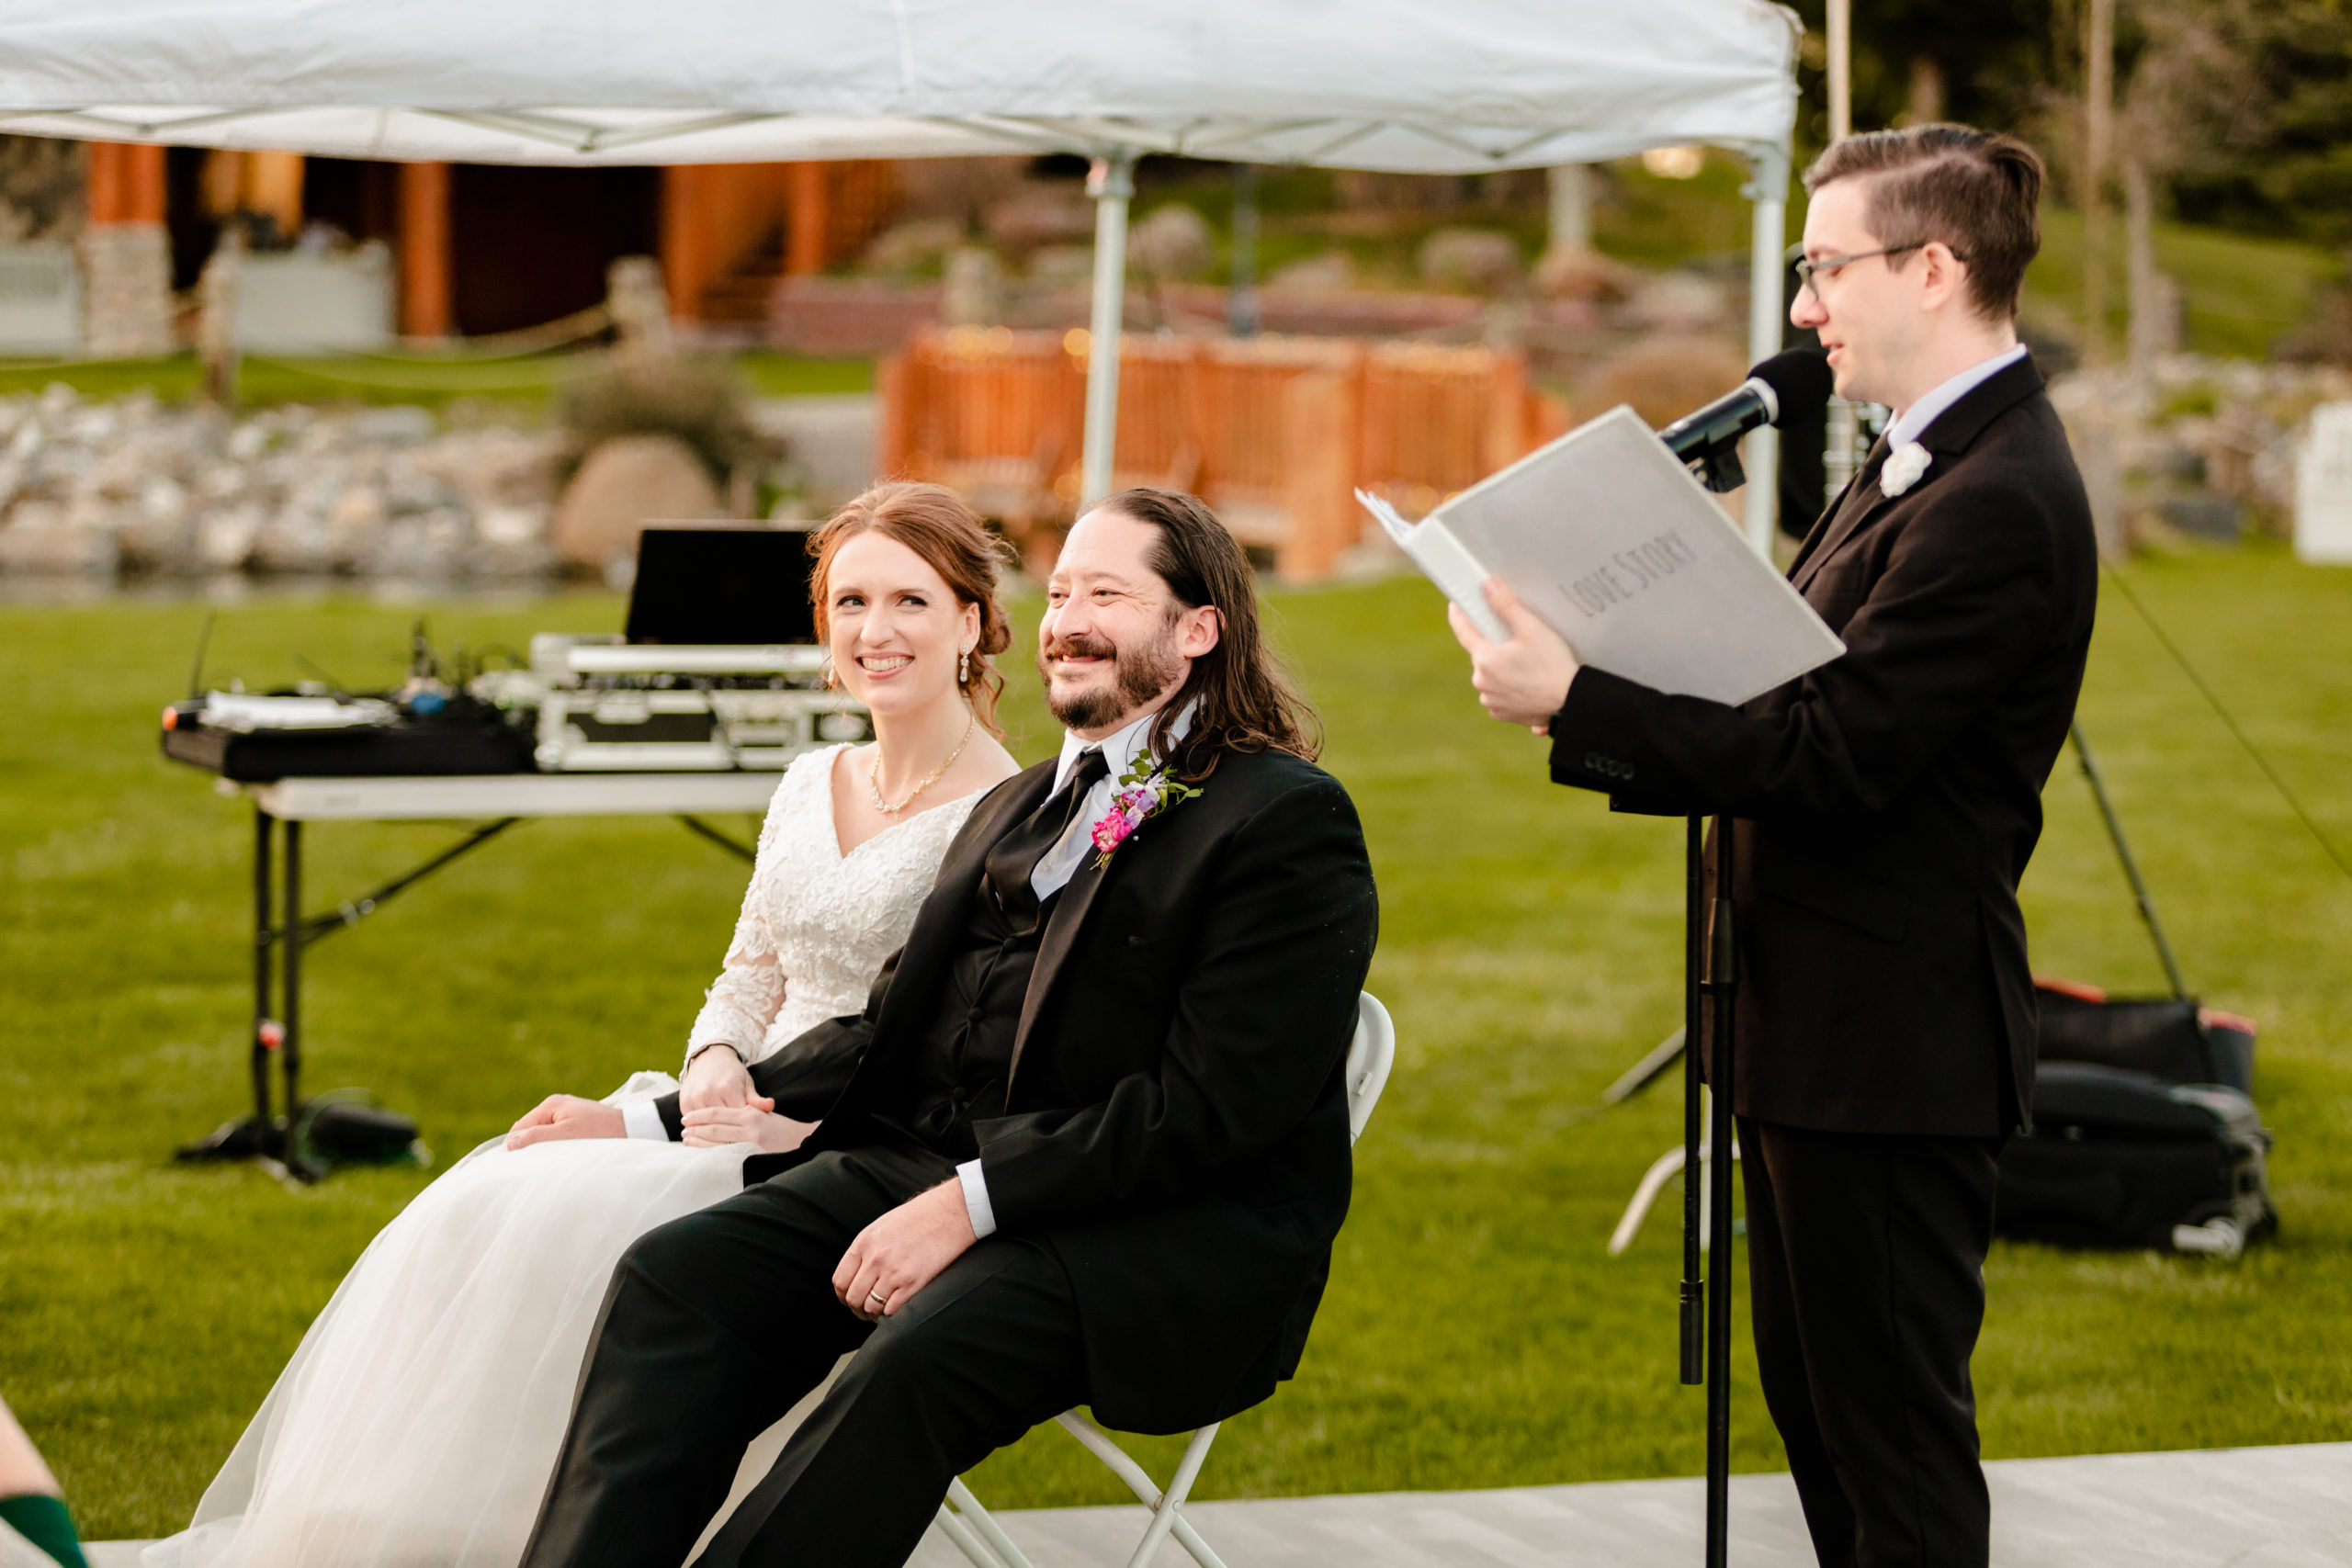 wedding entertainment at Colorful LaBelle Lake Reception